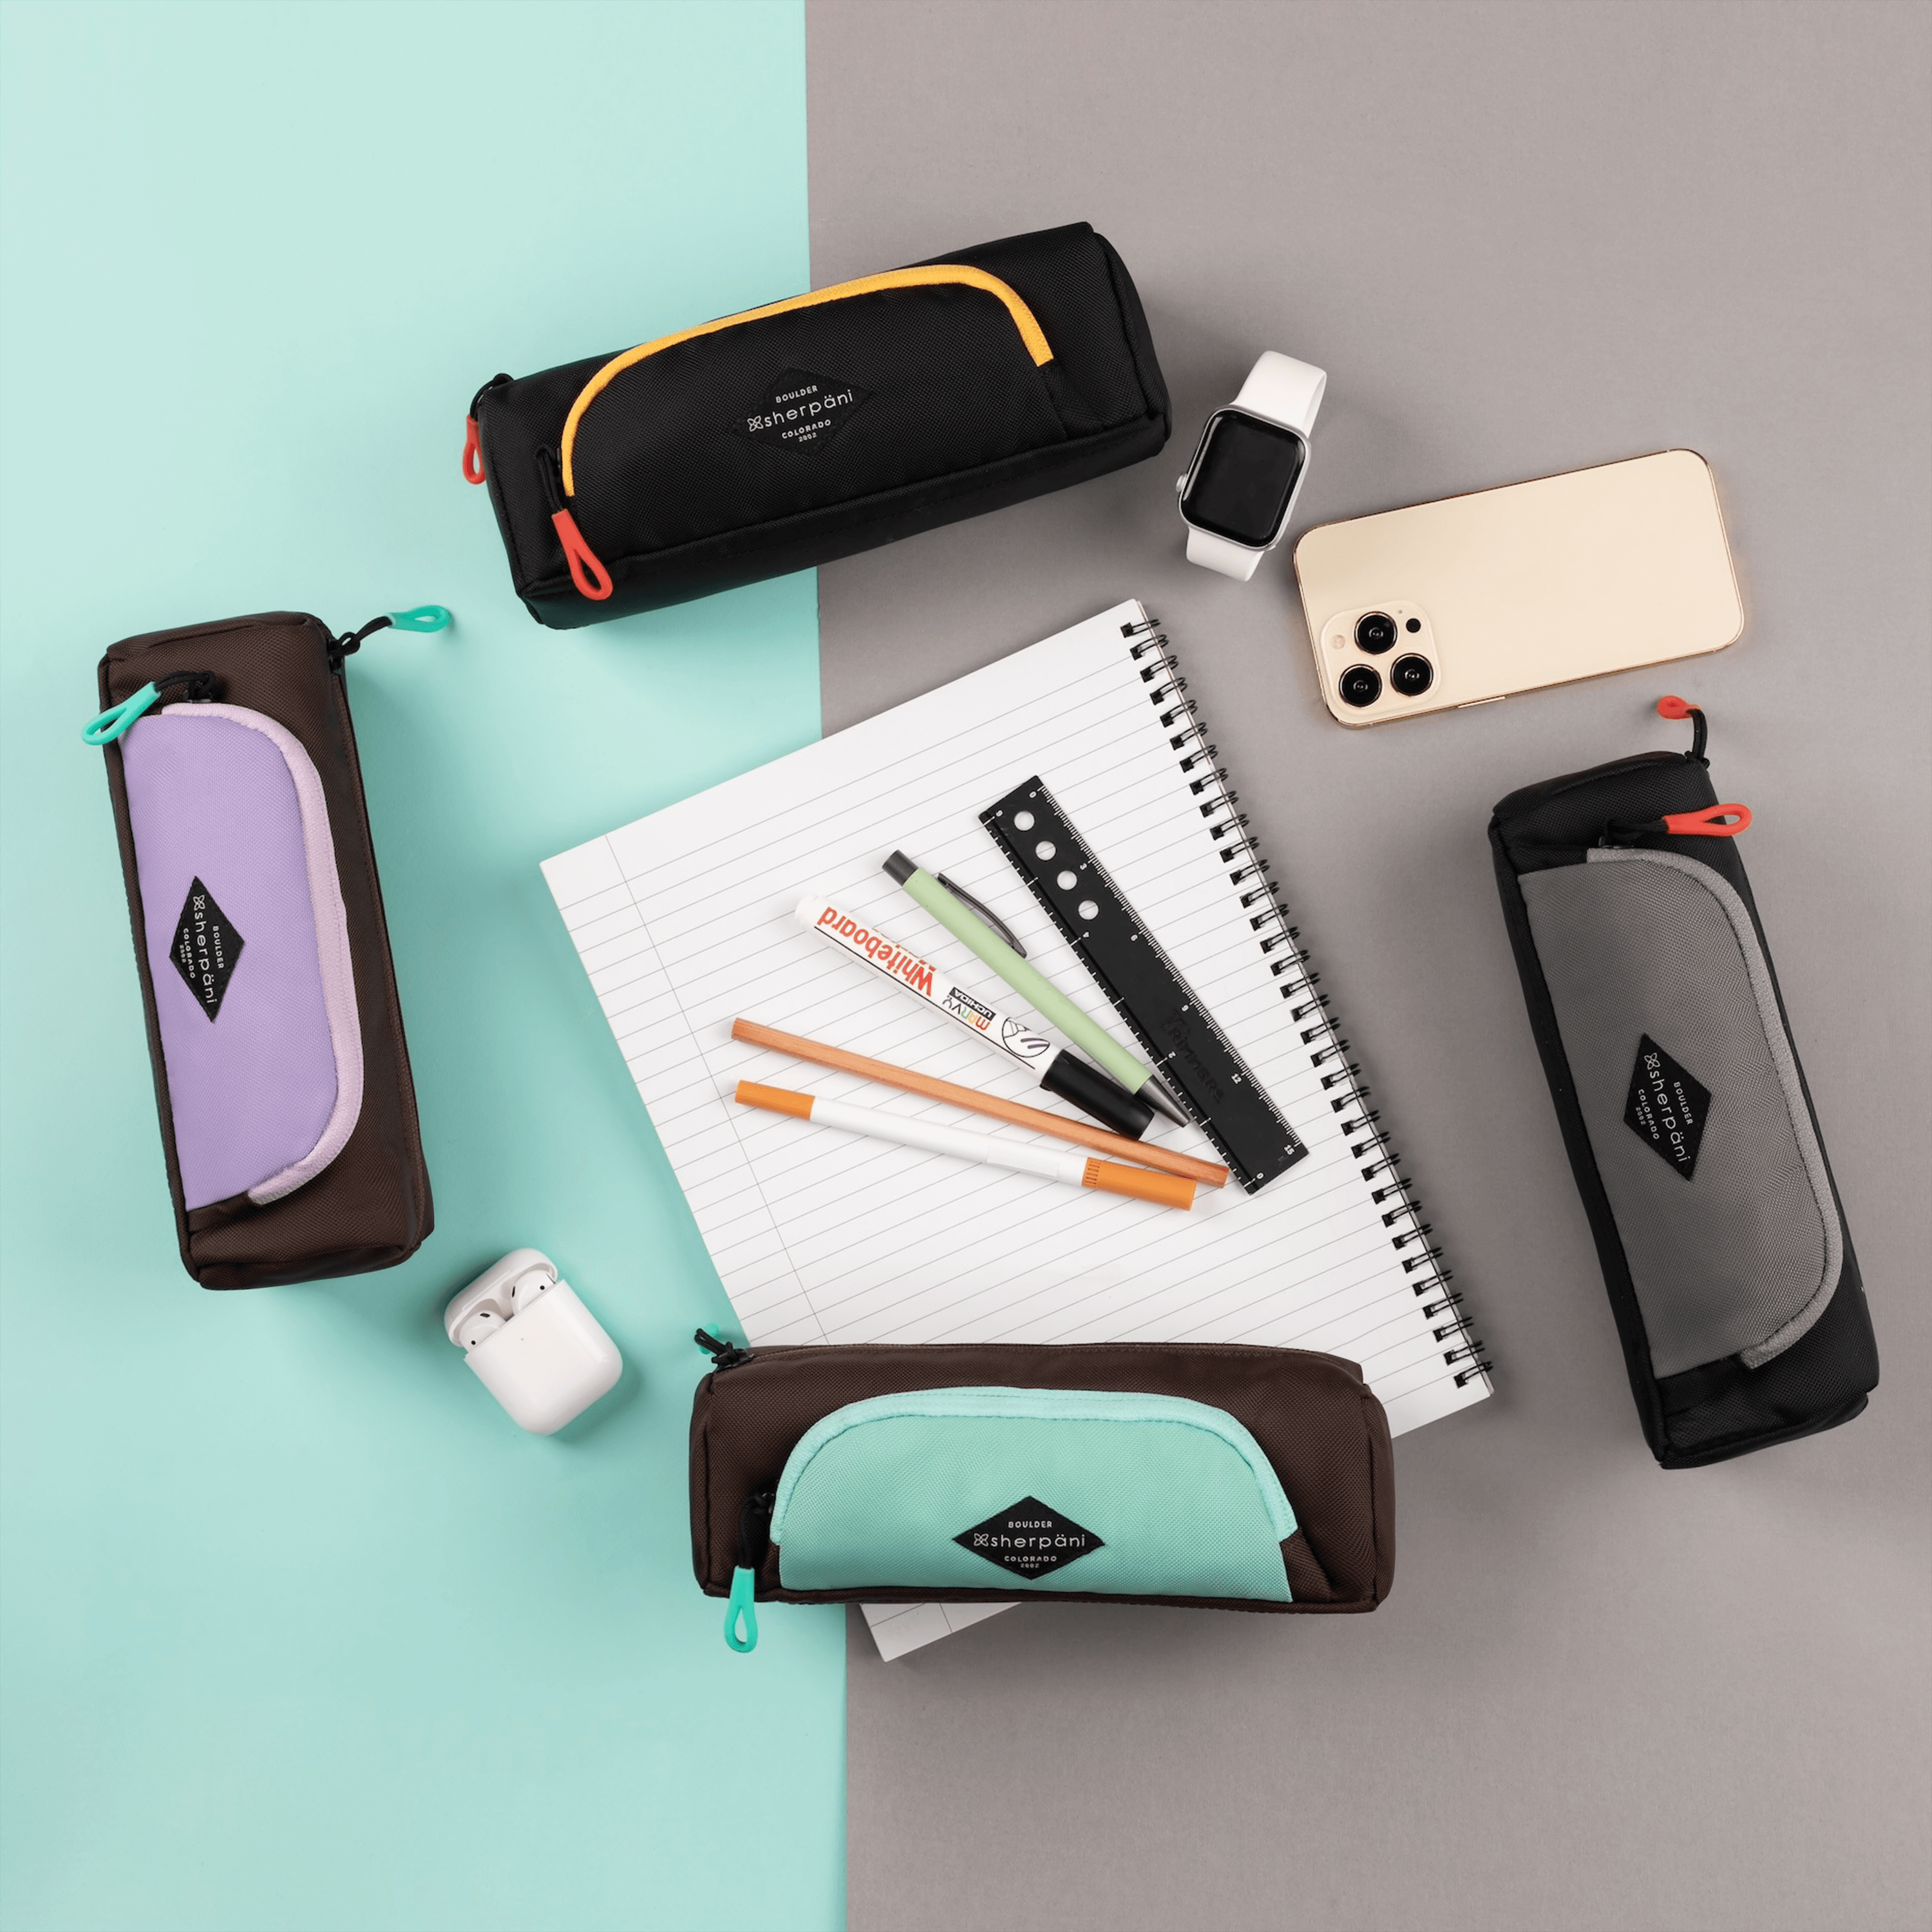 Top view of four Shepani travel accessories arranged in a circle along with example items for their use. Everything lies on a green and gray backdrop. Clockwise from upper left: Poet in Chromatic, smart watch, phone, Jolie in Stone, Jolie in Seagreen, AirPods, Jolie in Lavender. In the center lies a notebook and markers.